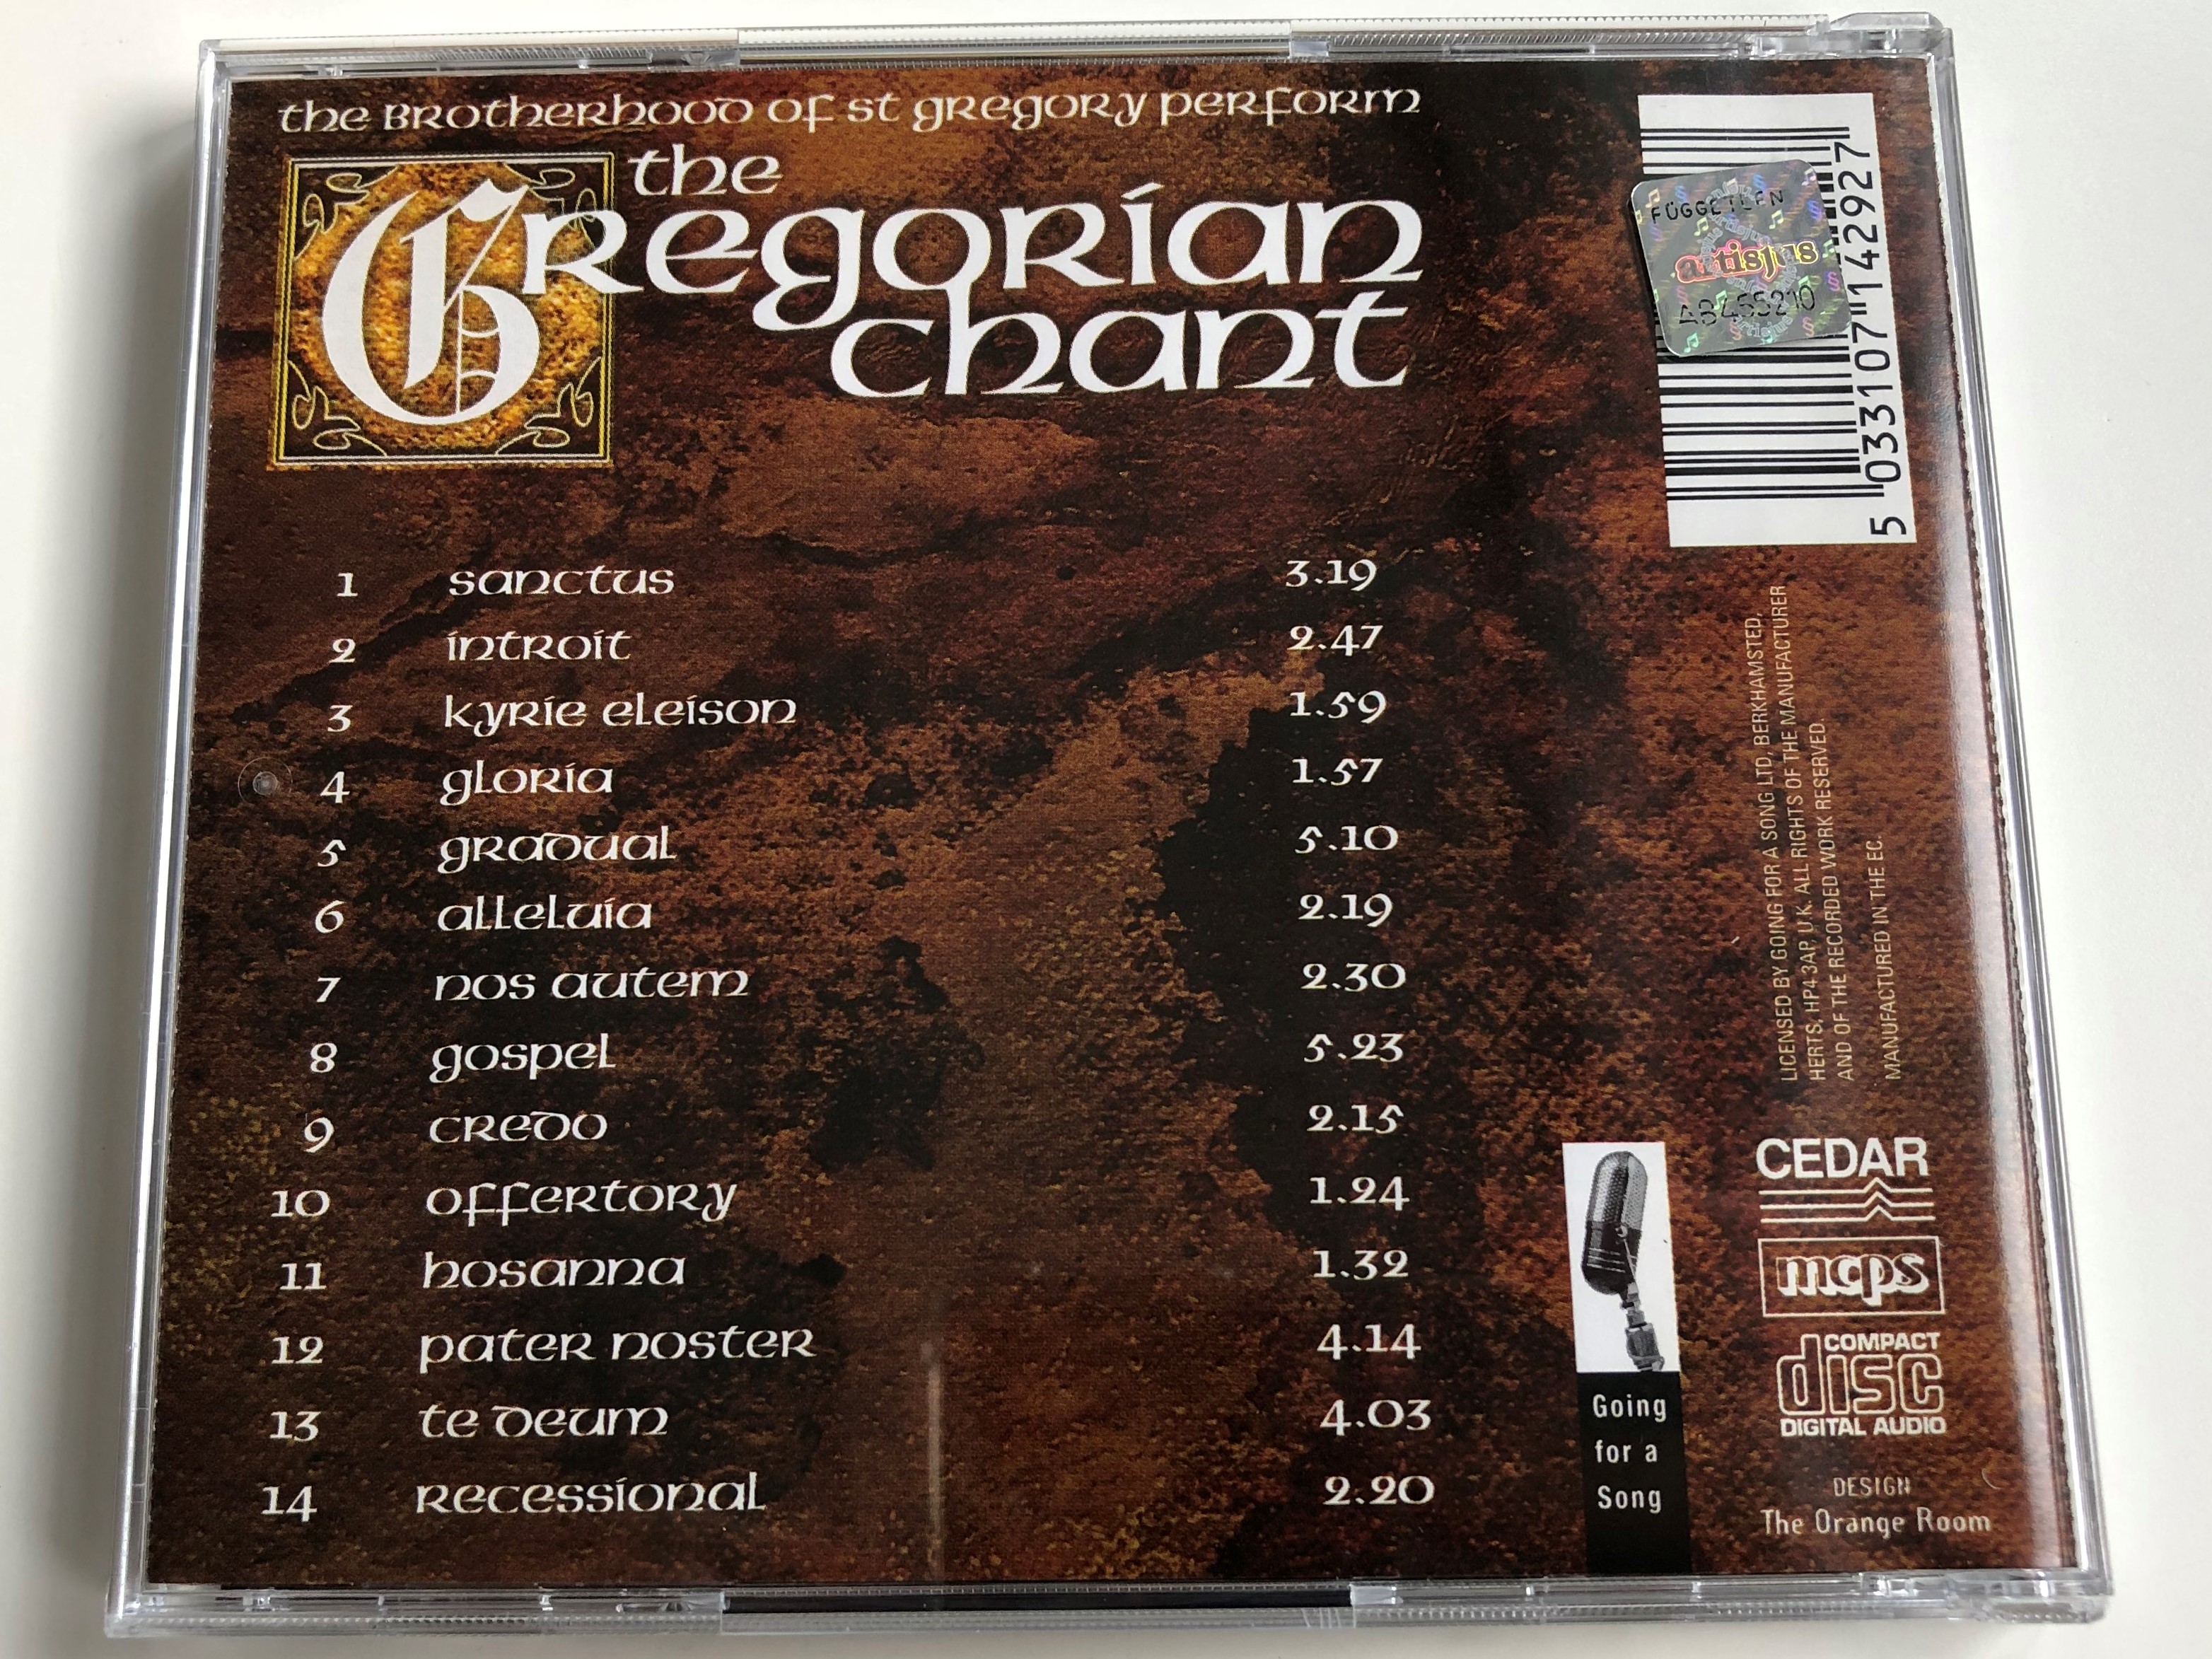 the-brotherhood-of-st.-gregory-perform-the-gregorian-chant-sanctus-gloria-credo-hosanna-recessional-and-many-more-going-for-a-song-audio-cd-gfs429-5-.jpg